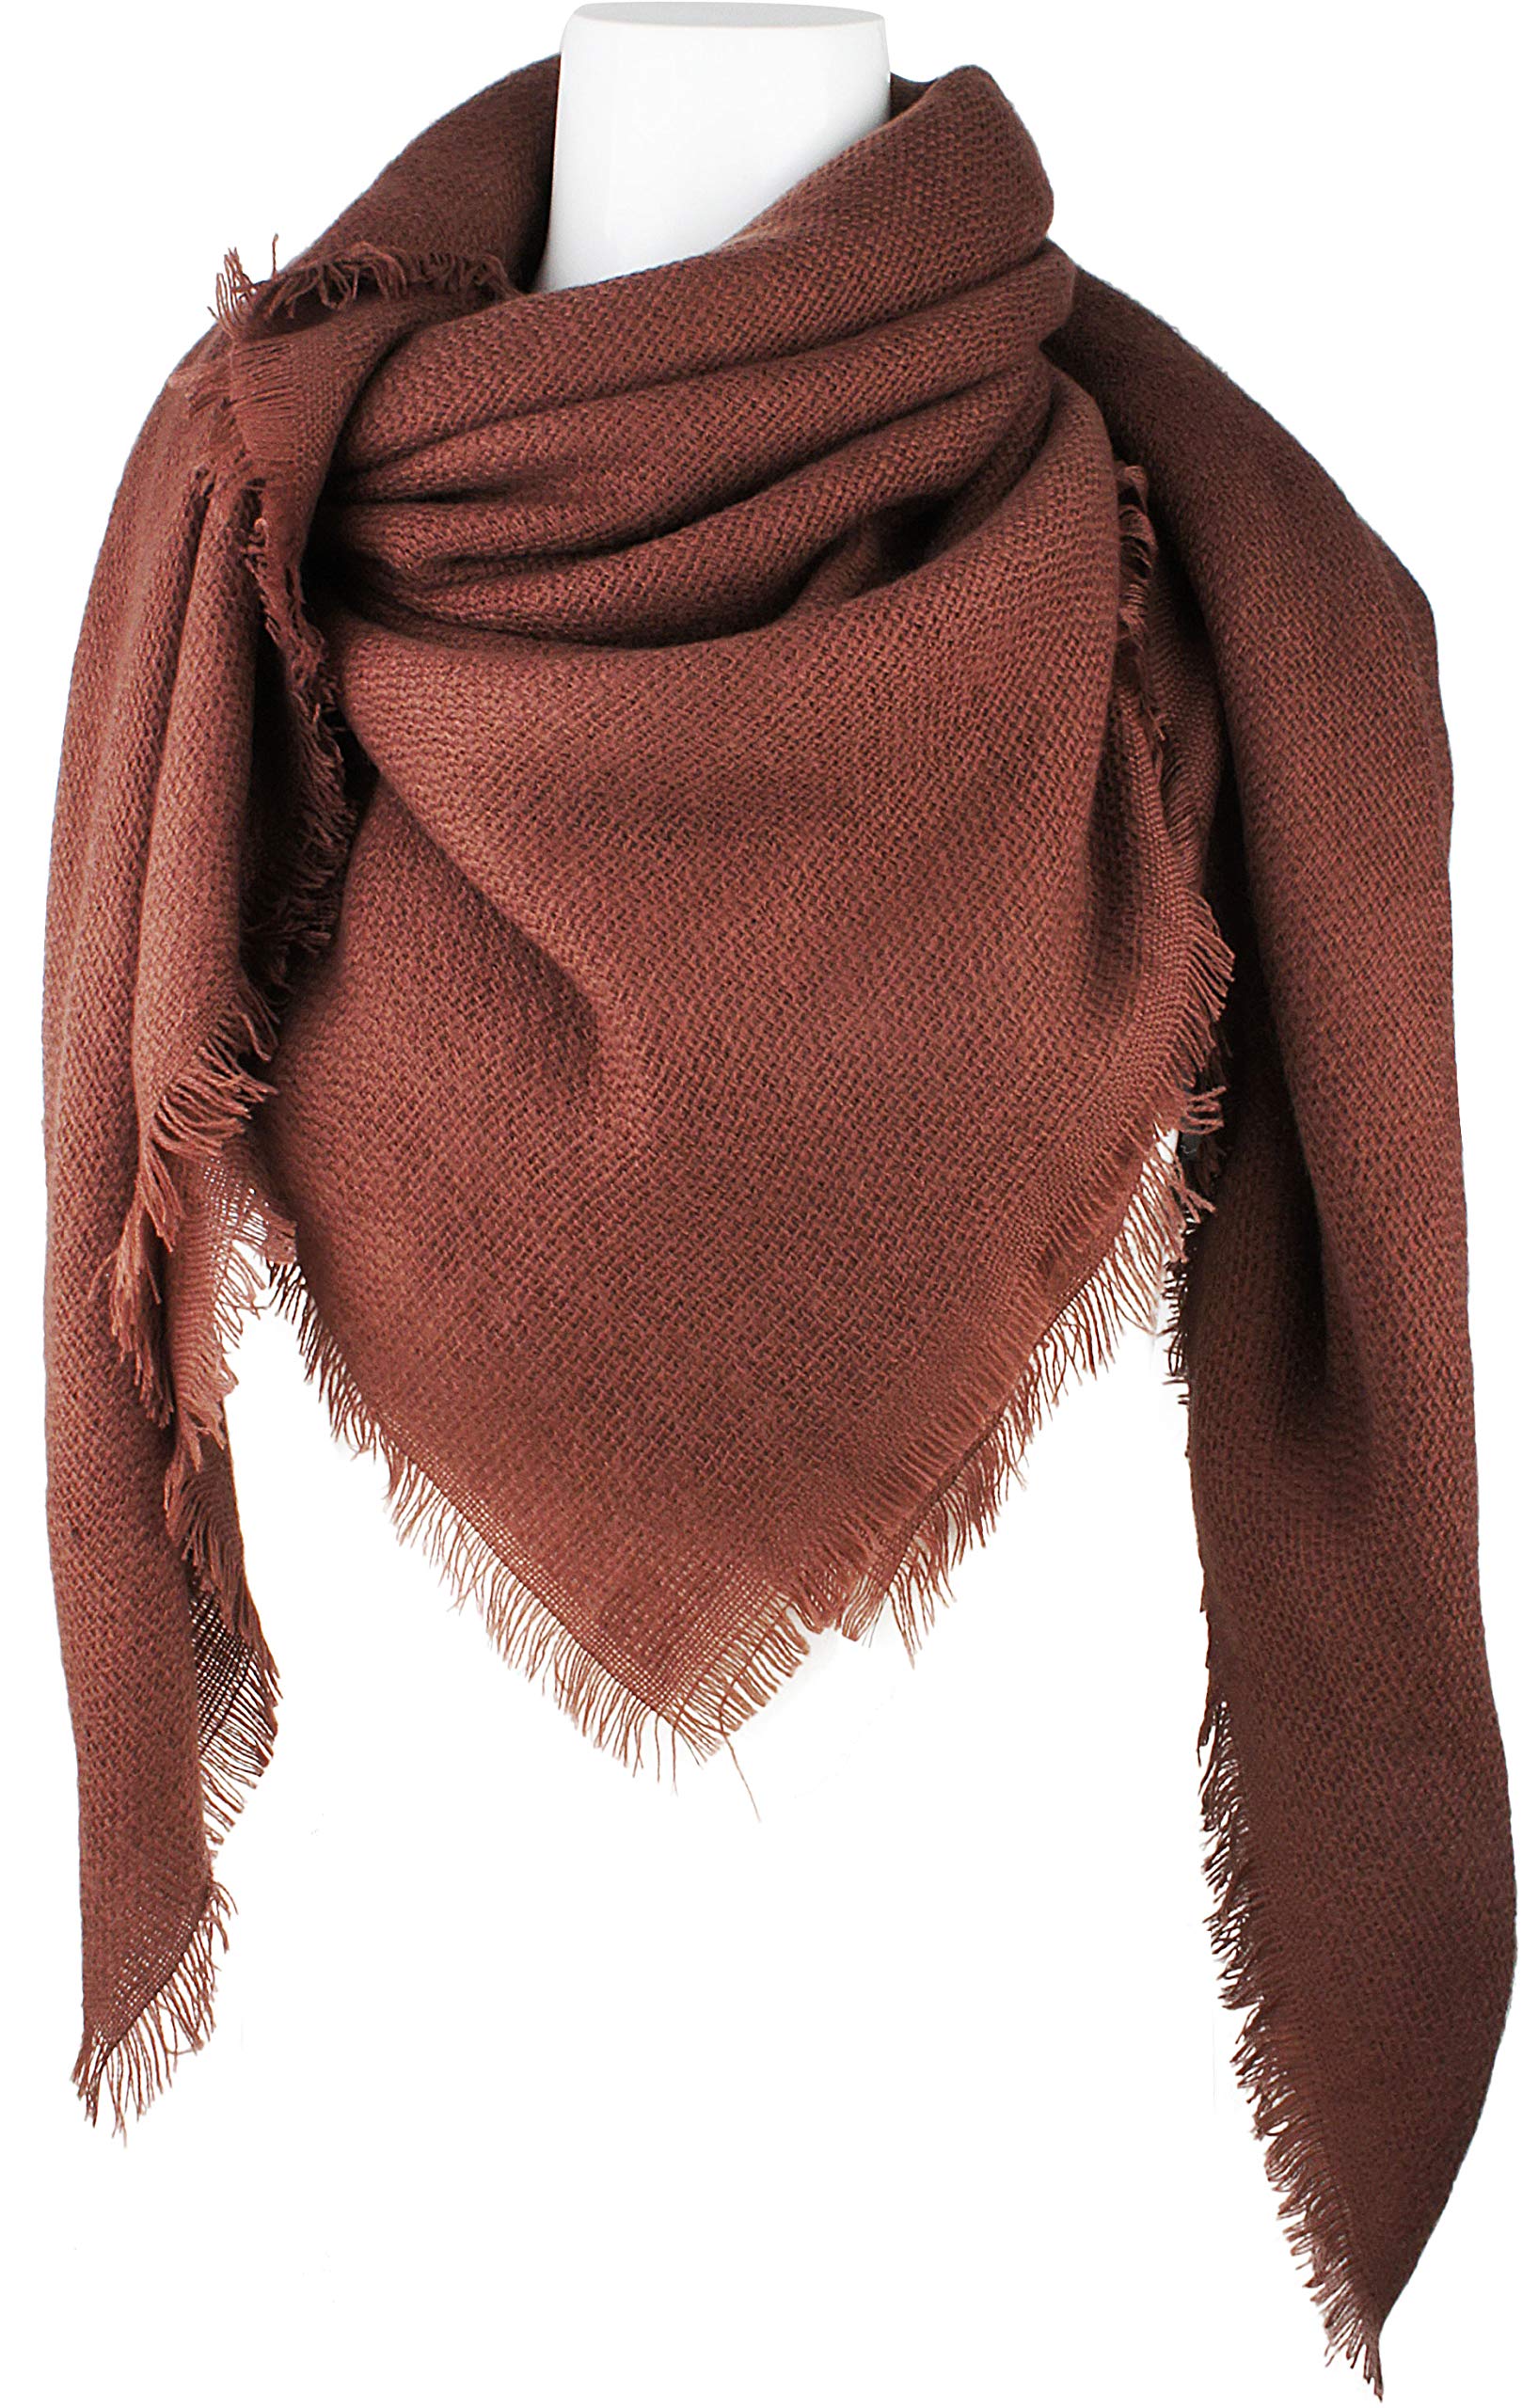 Soft Classic Luxurious Blanket Solid Color Square Scarf Wrap